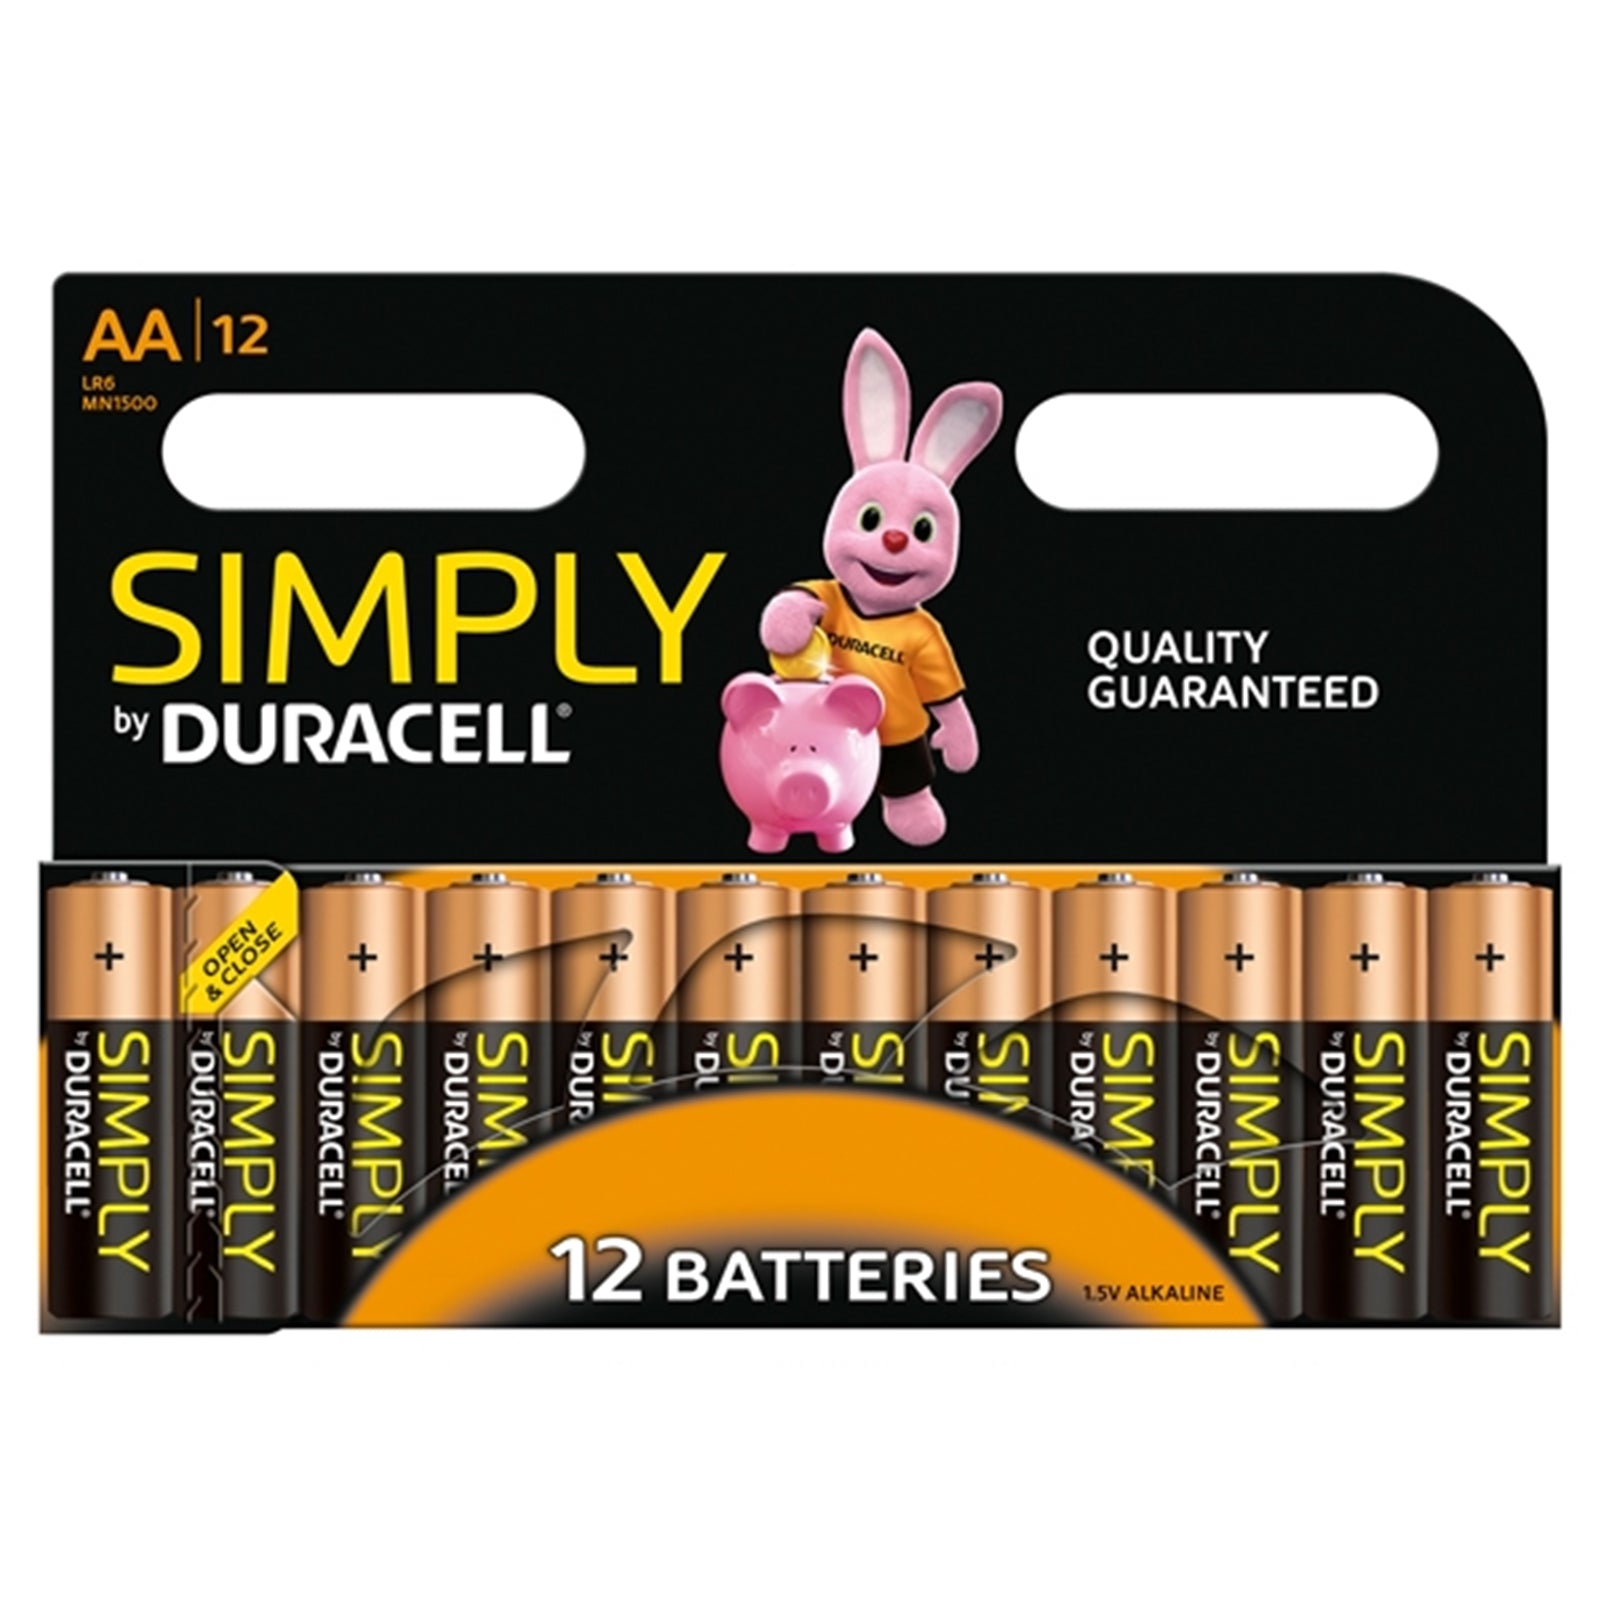 Duracell Simply AA Alkaline Batteries 12 Pack for Everyday Use